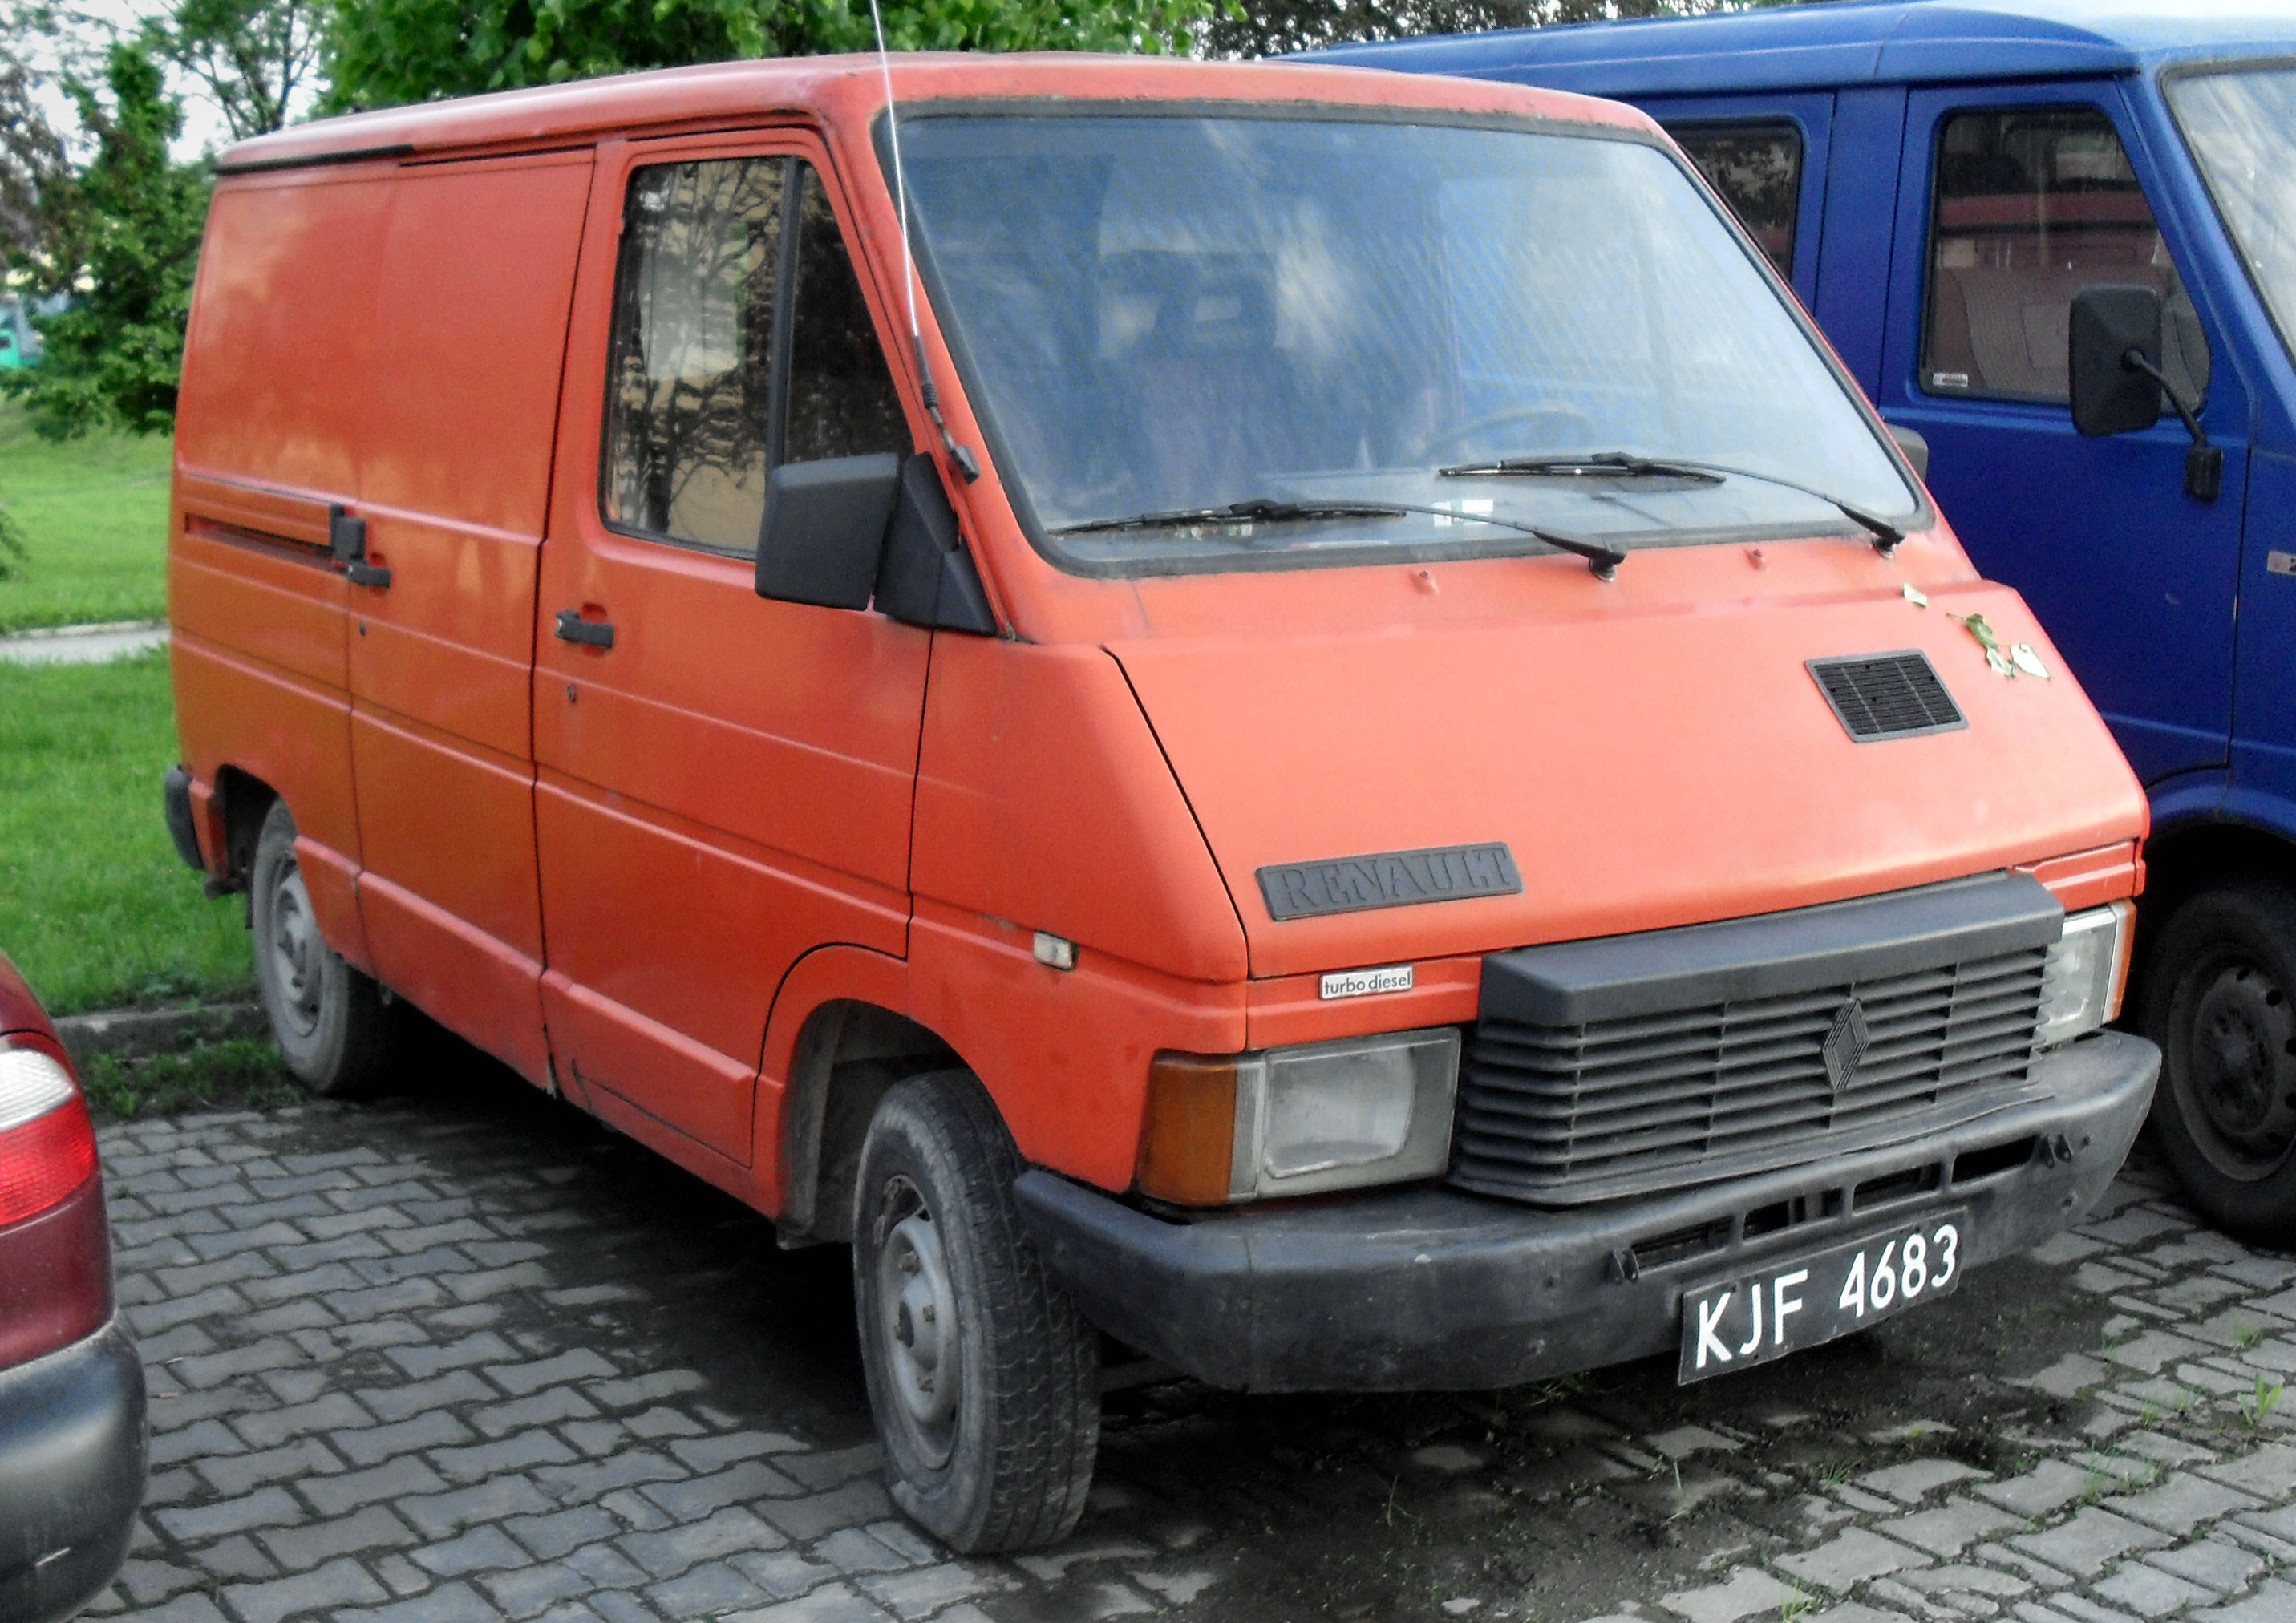 Renault Trafic, Tractor & Construction Plant Wiki